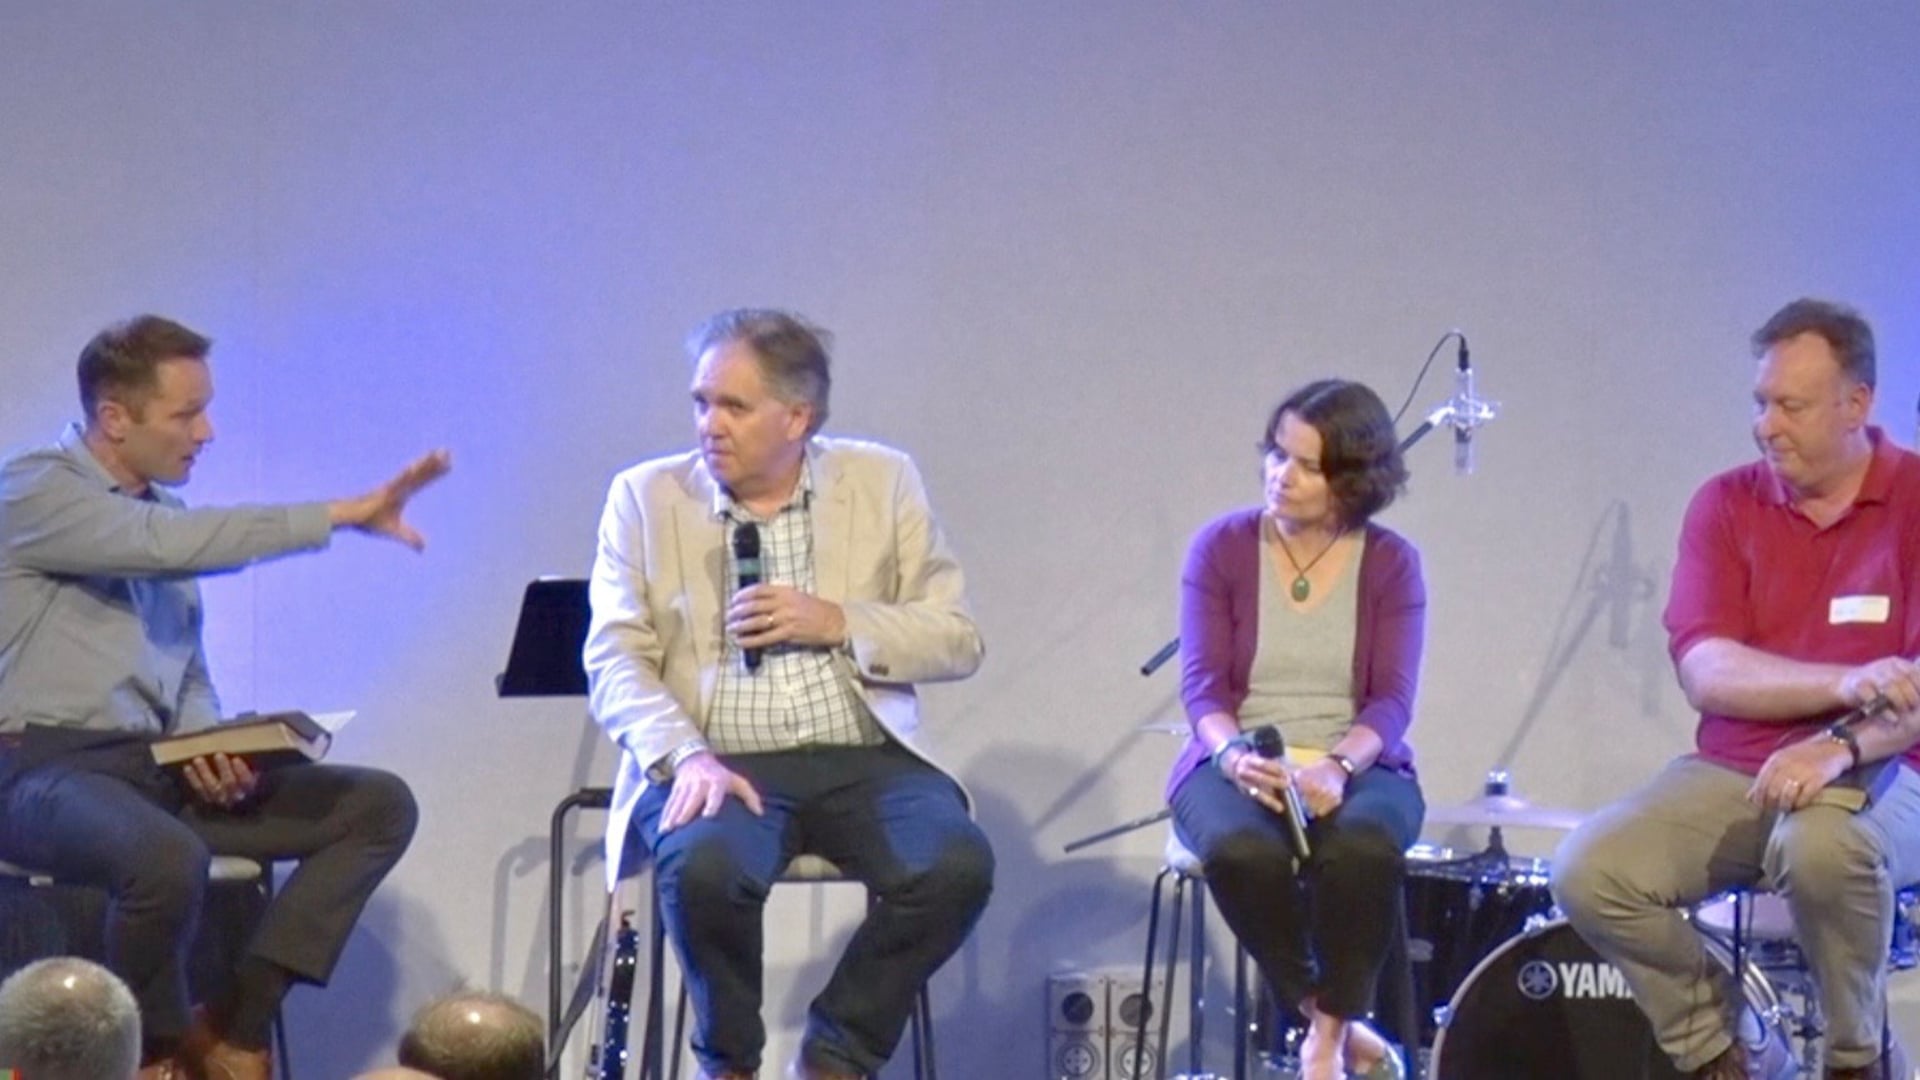 How can we do evangelism better? with Alison Napier, Phil Colgan, Dominic Steele | 02.04.19